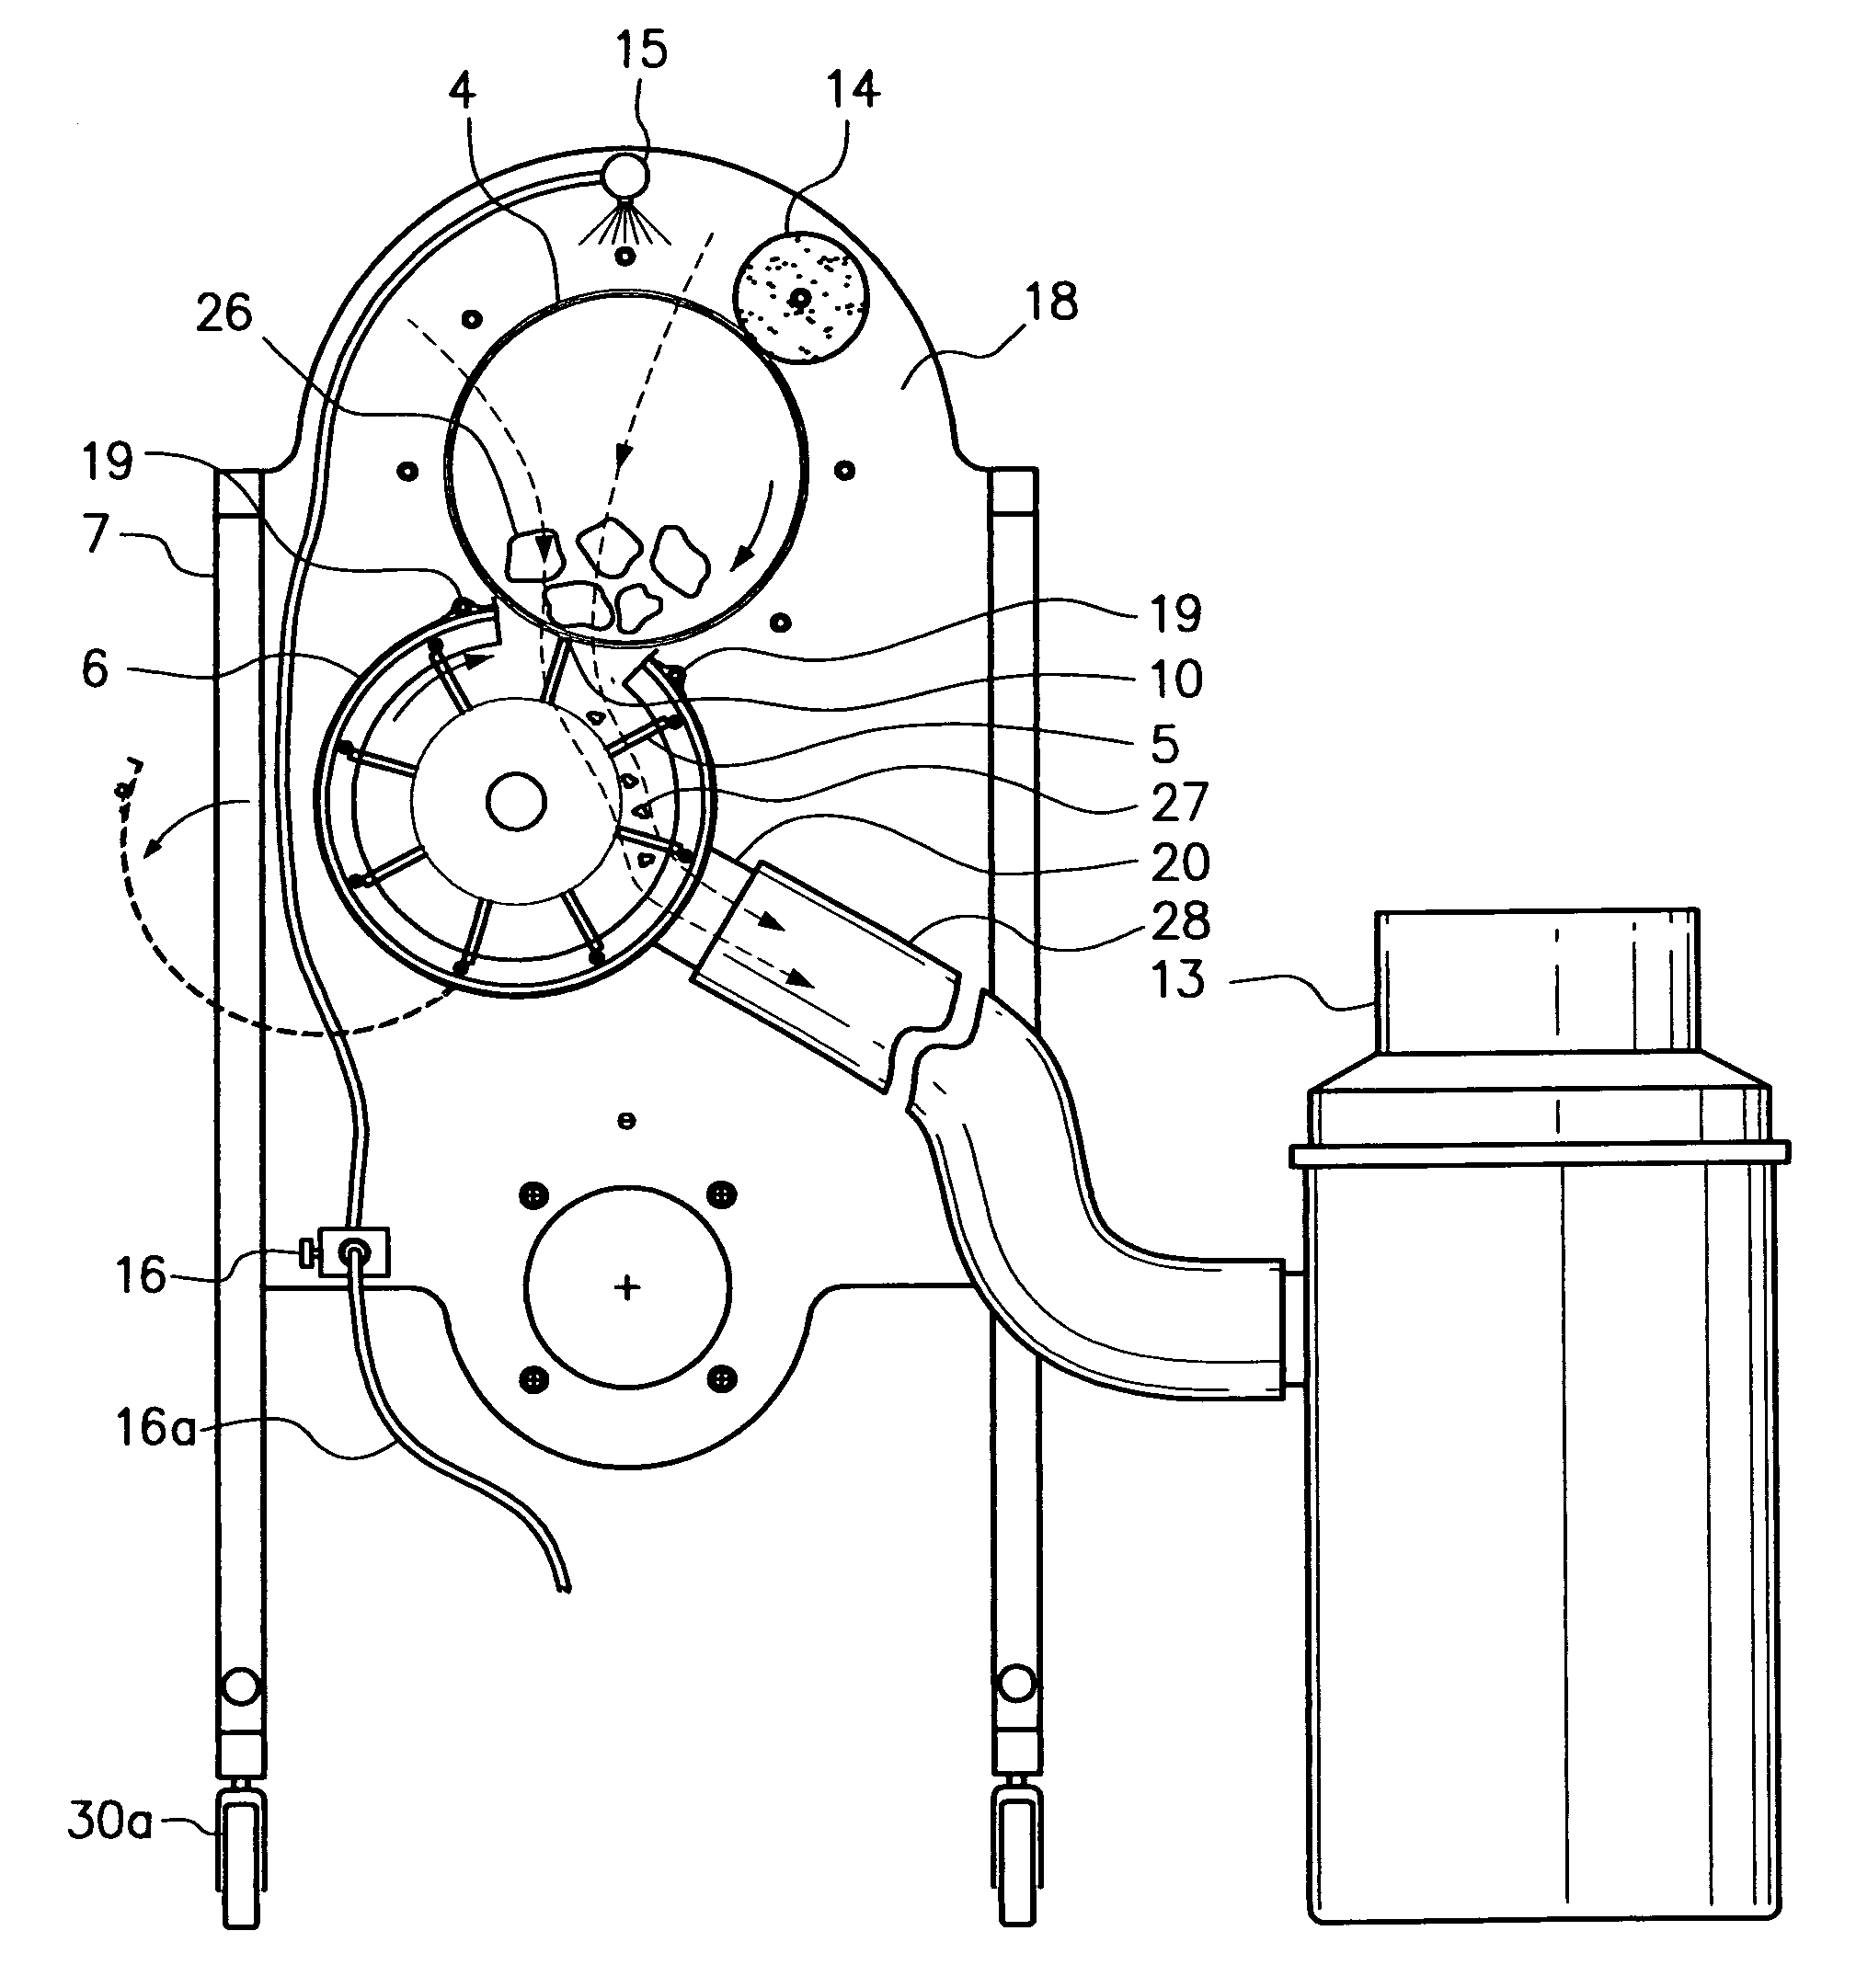 Method and apparatus for trimming buds and flowers